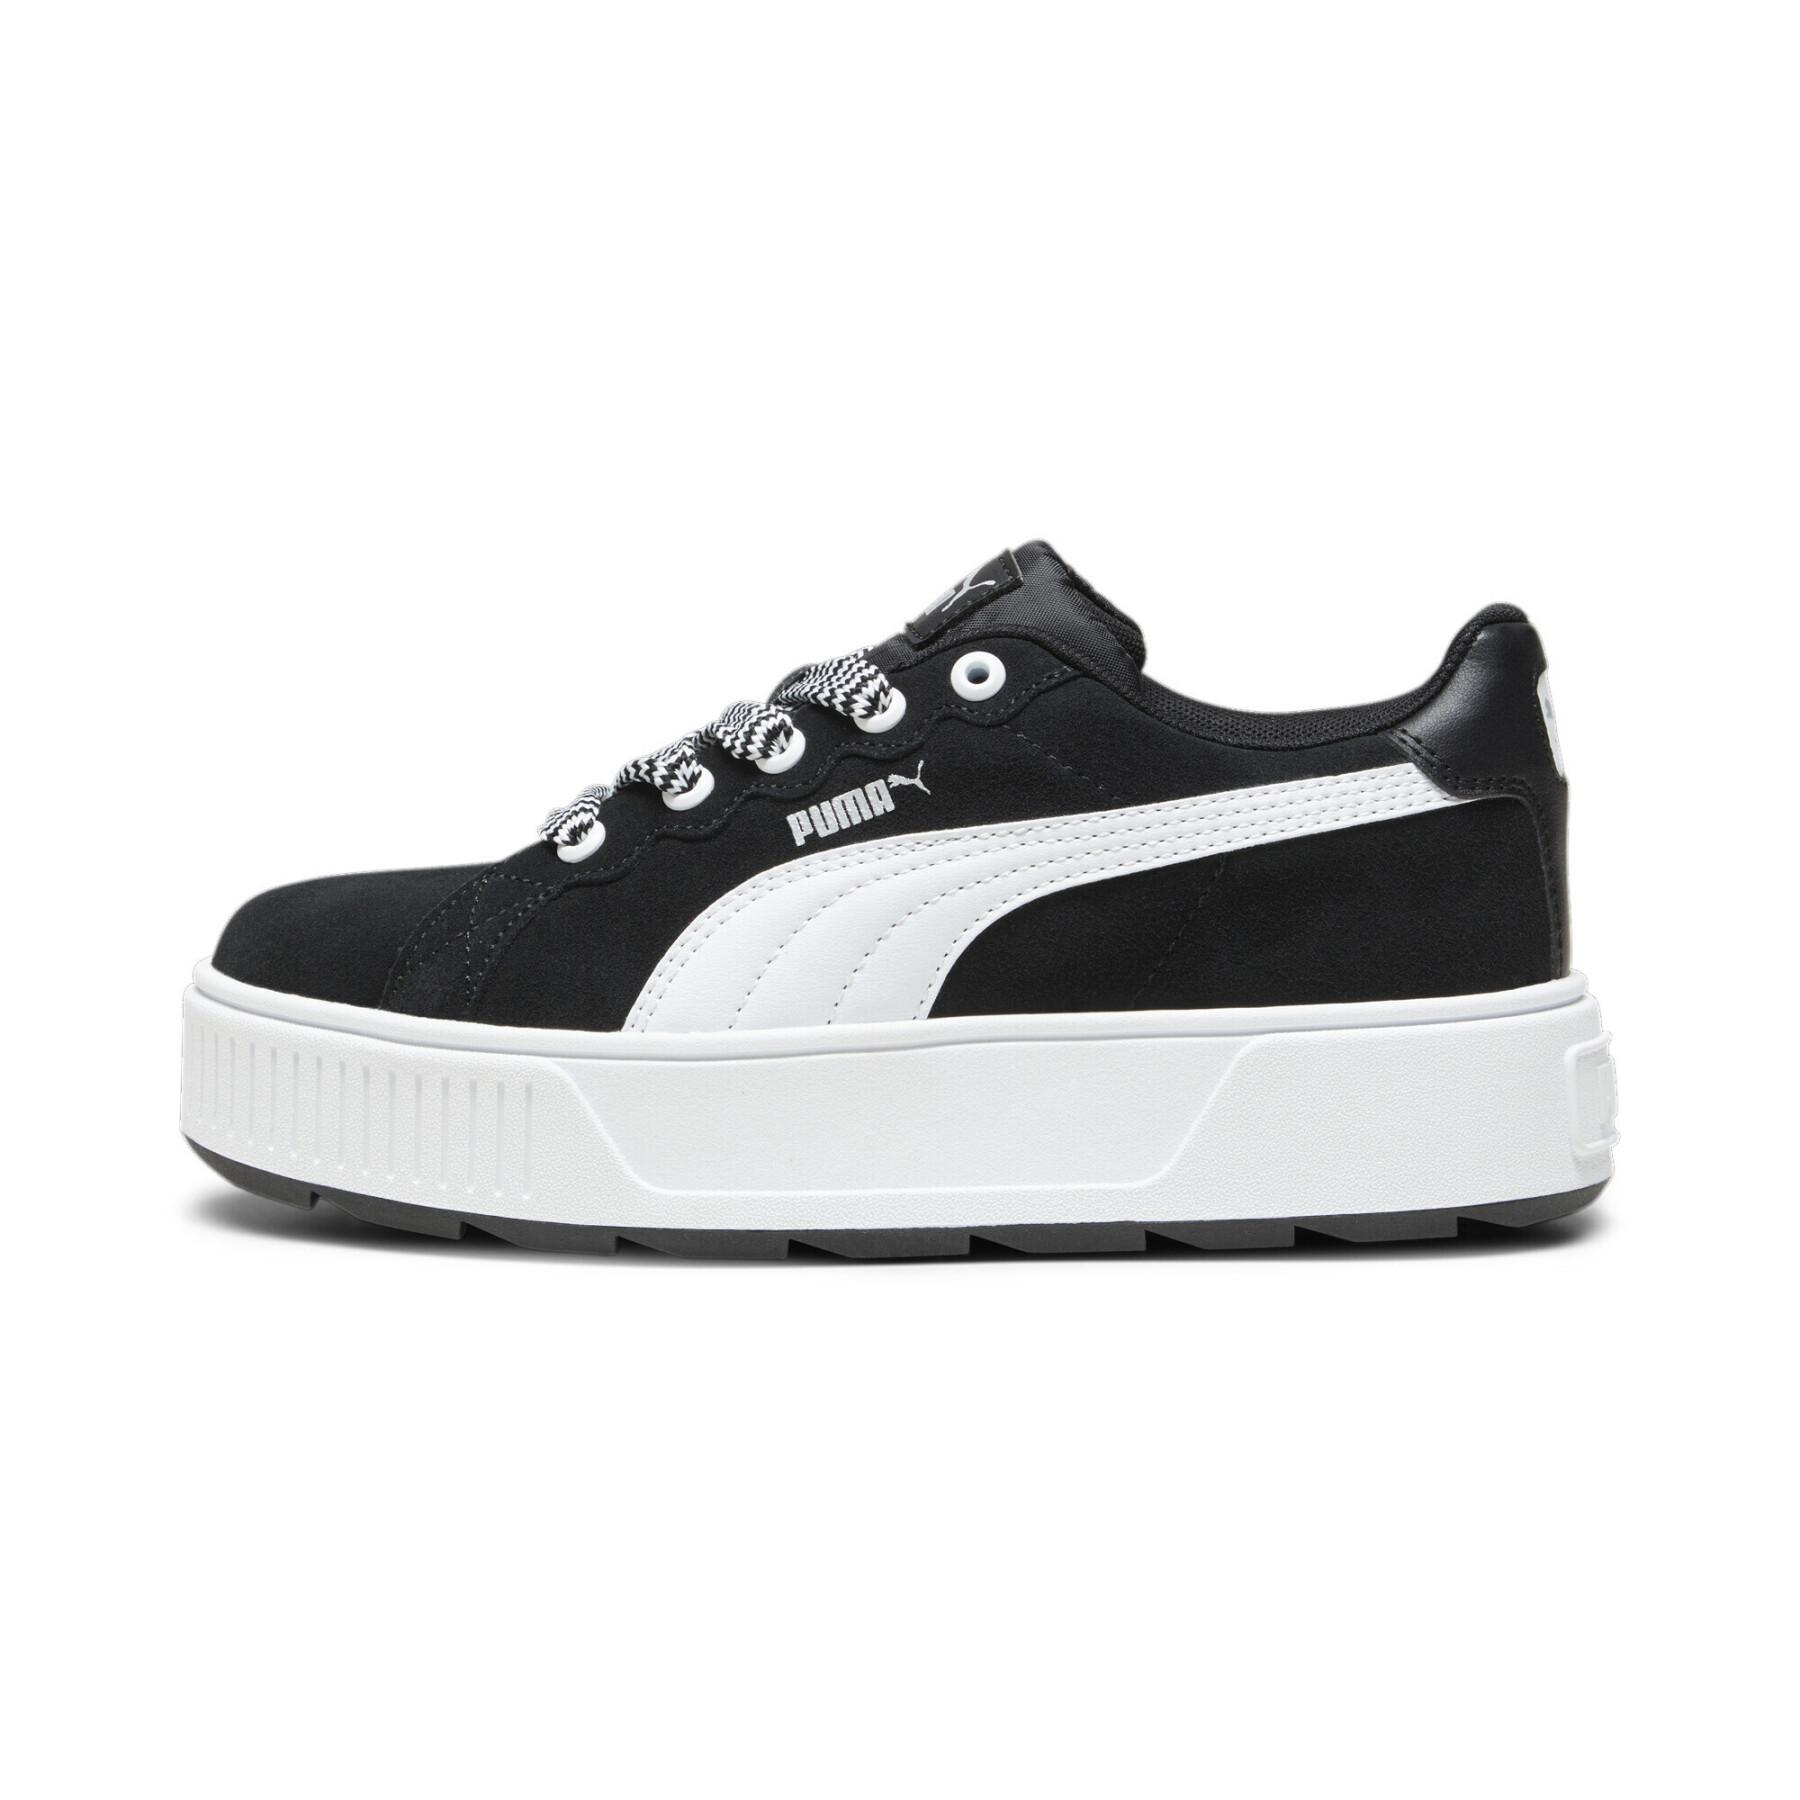 Women's thick lace-up sneakers Puma Karmen